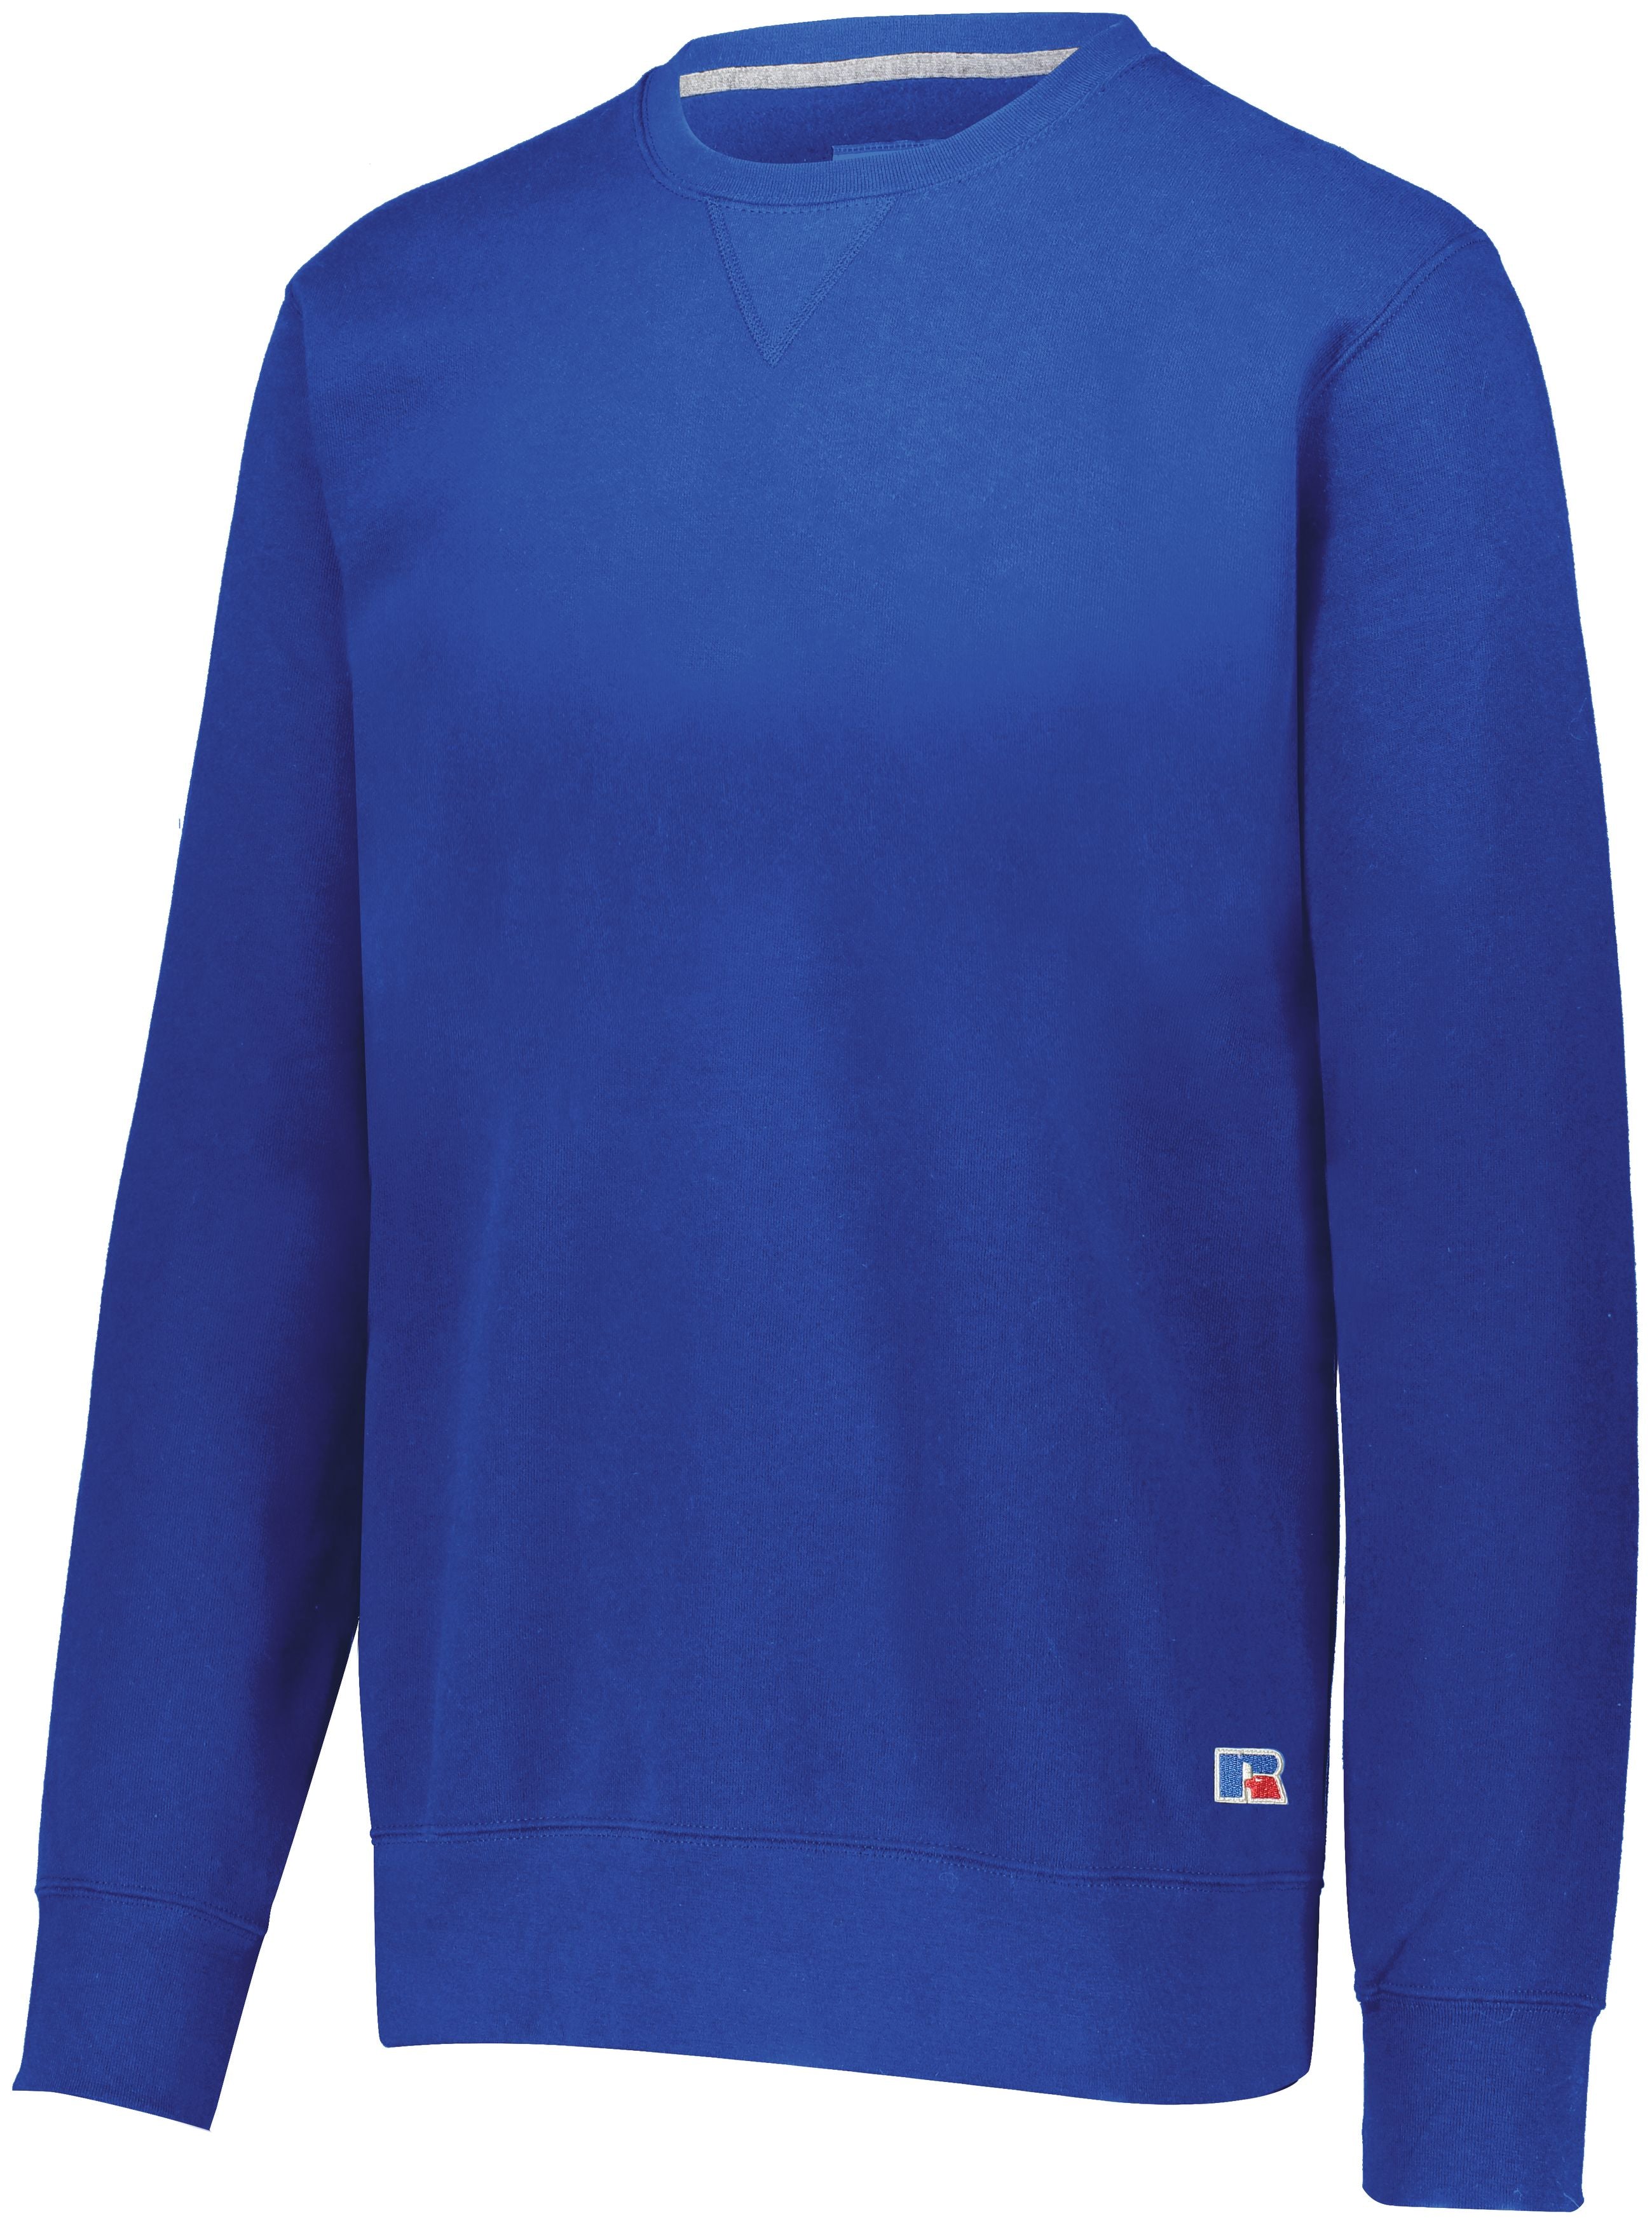 Russell Athletic 80/20 Fleece Crew in Royal  -Part of the Adult, Russell-Athletic-Products product lines at KanaleyCreations.com